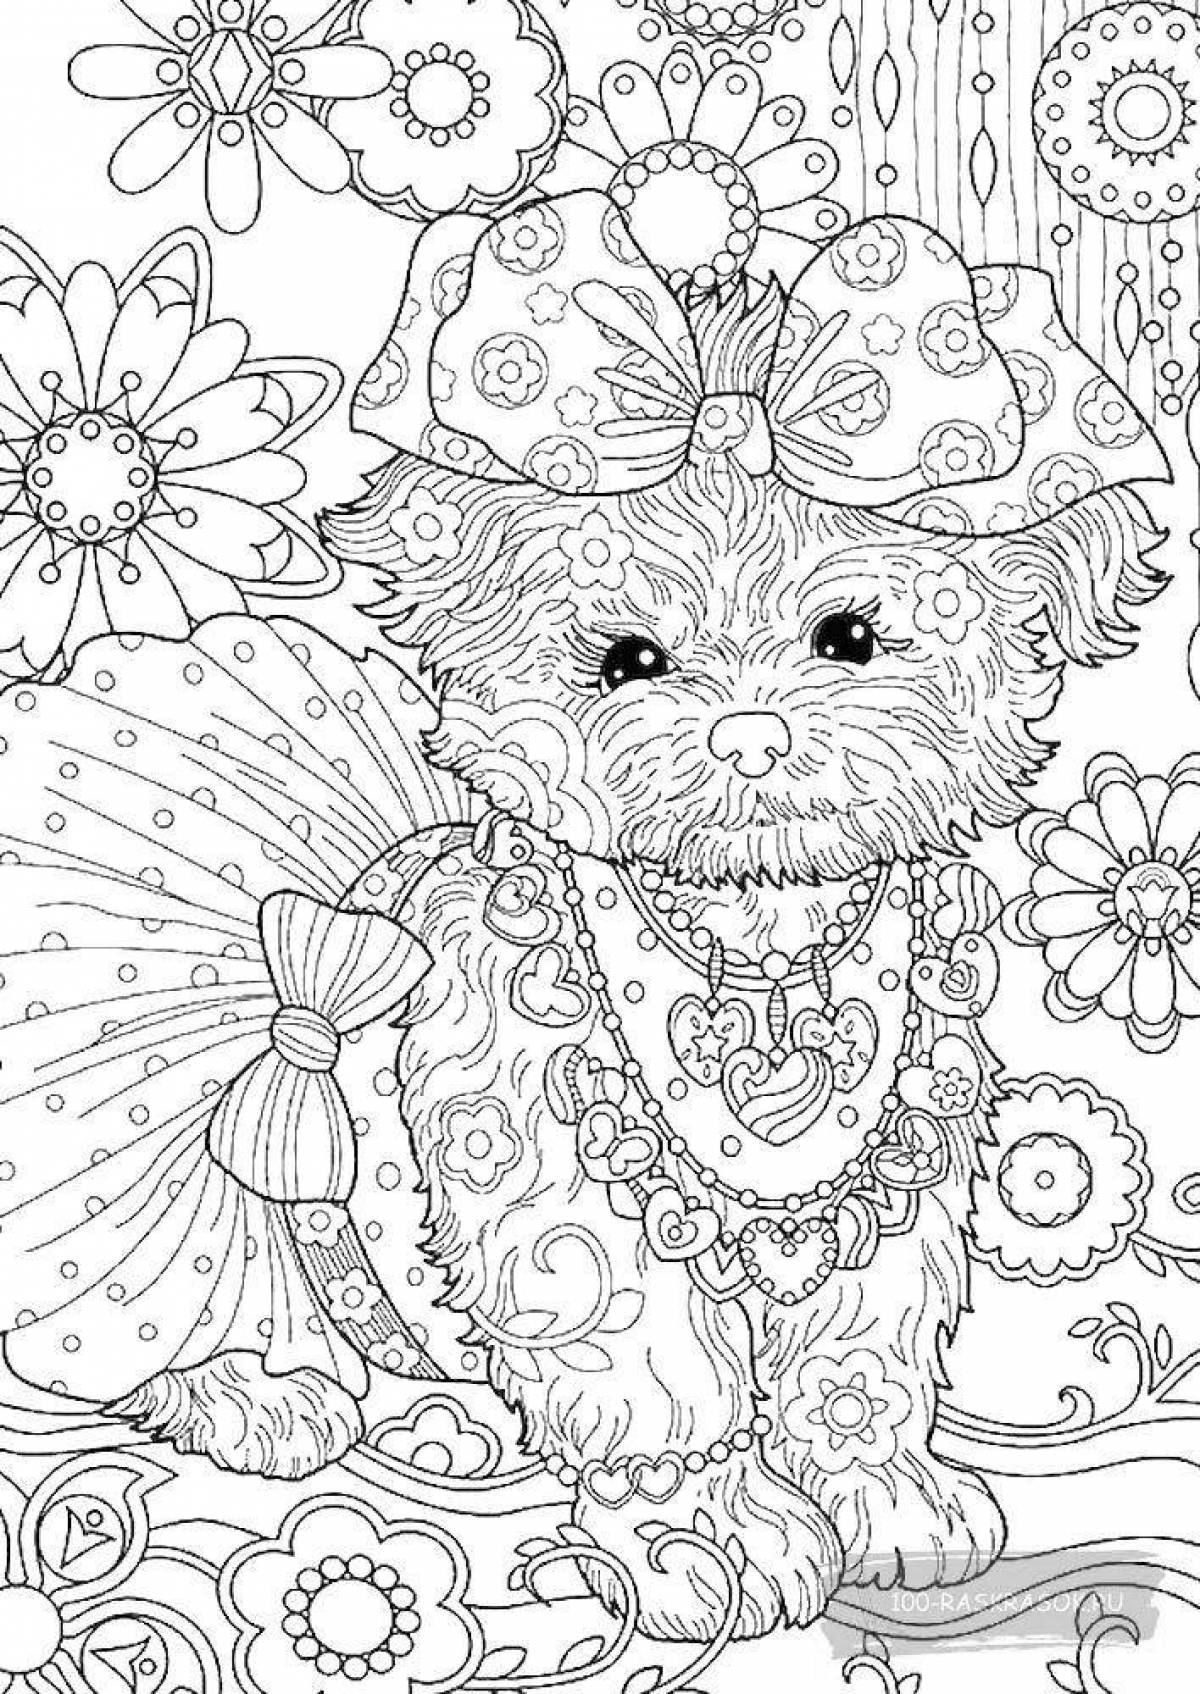 Cute coloring for girls 10 years old animals